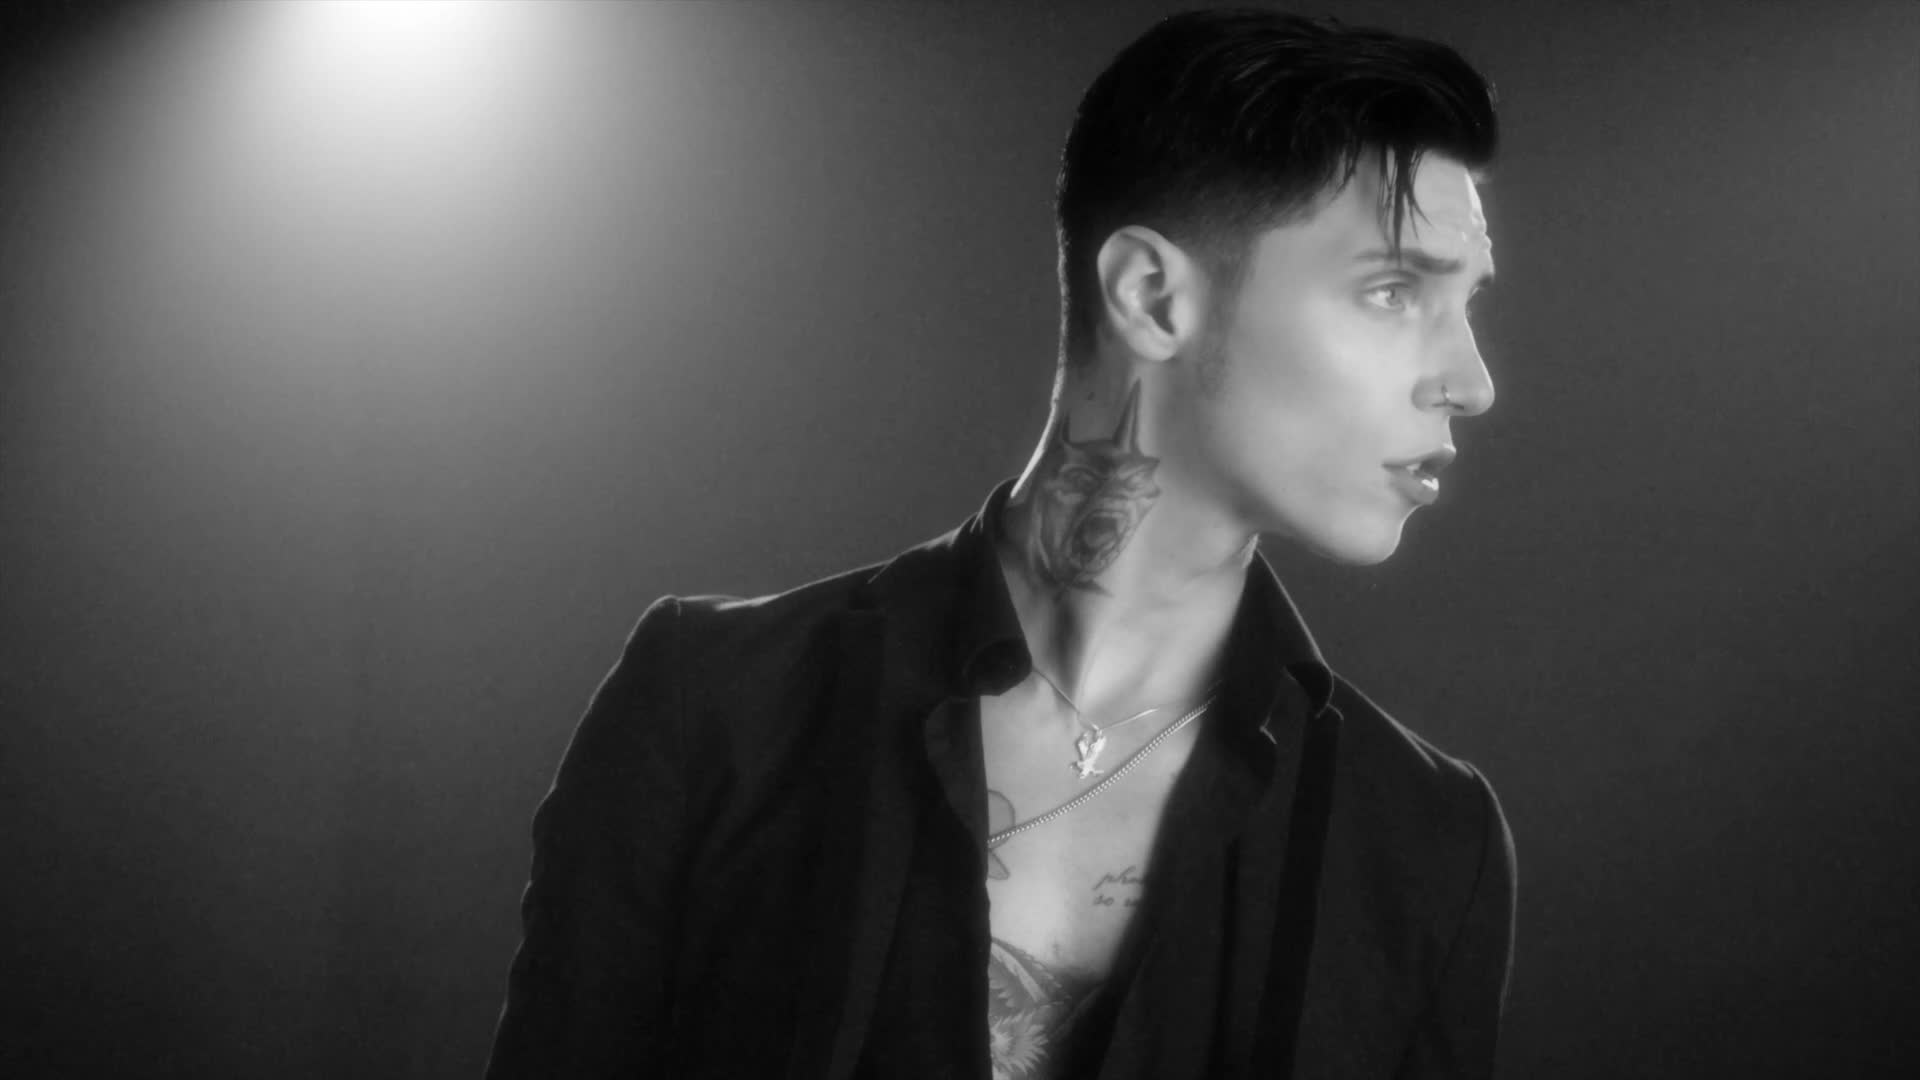 Andy Black & Juliet Simms, "When We Were Young"